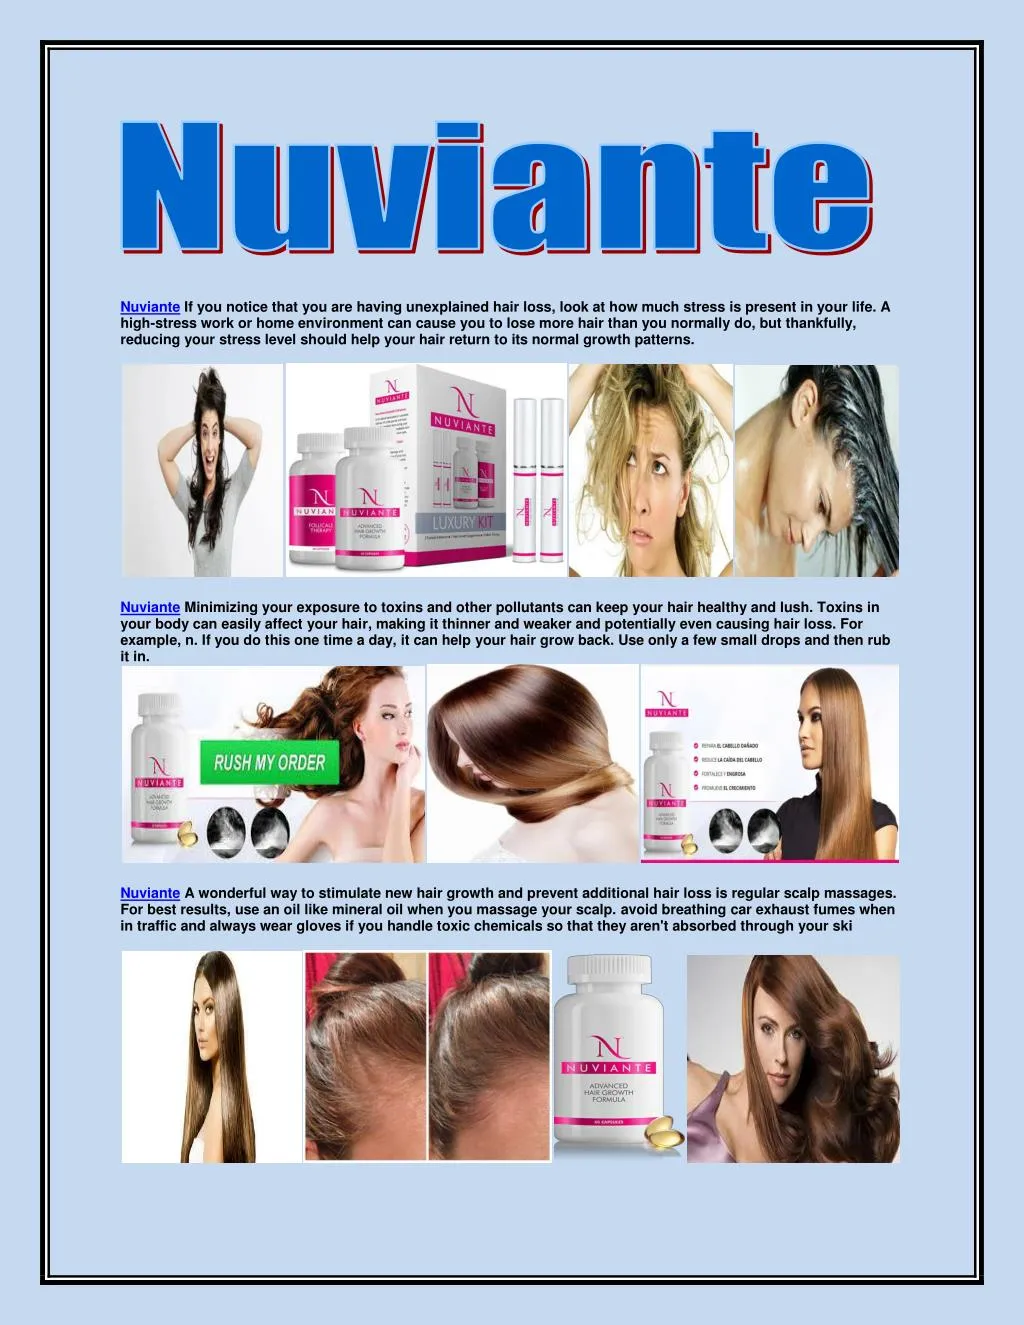 nuviante if you notice that you are having